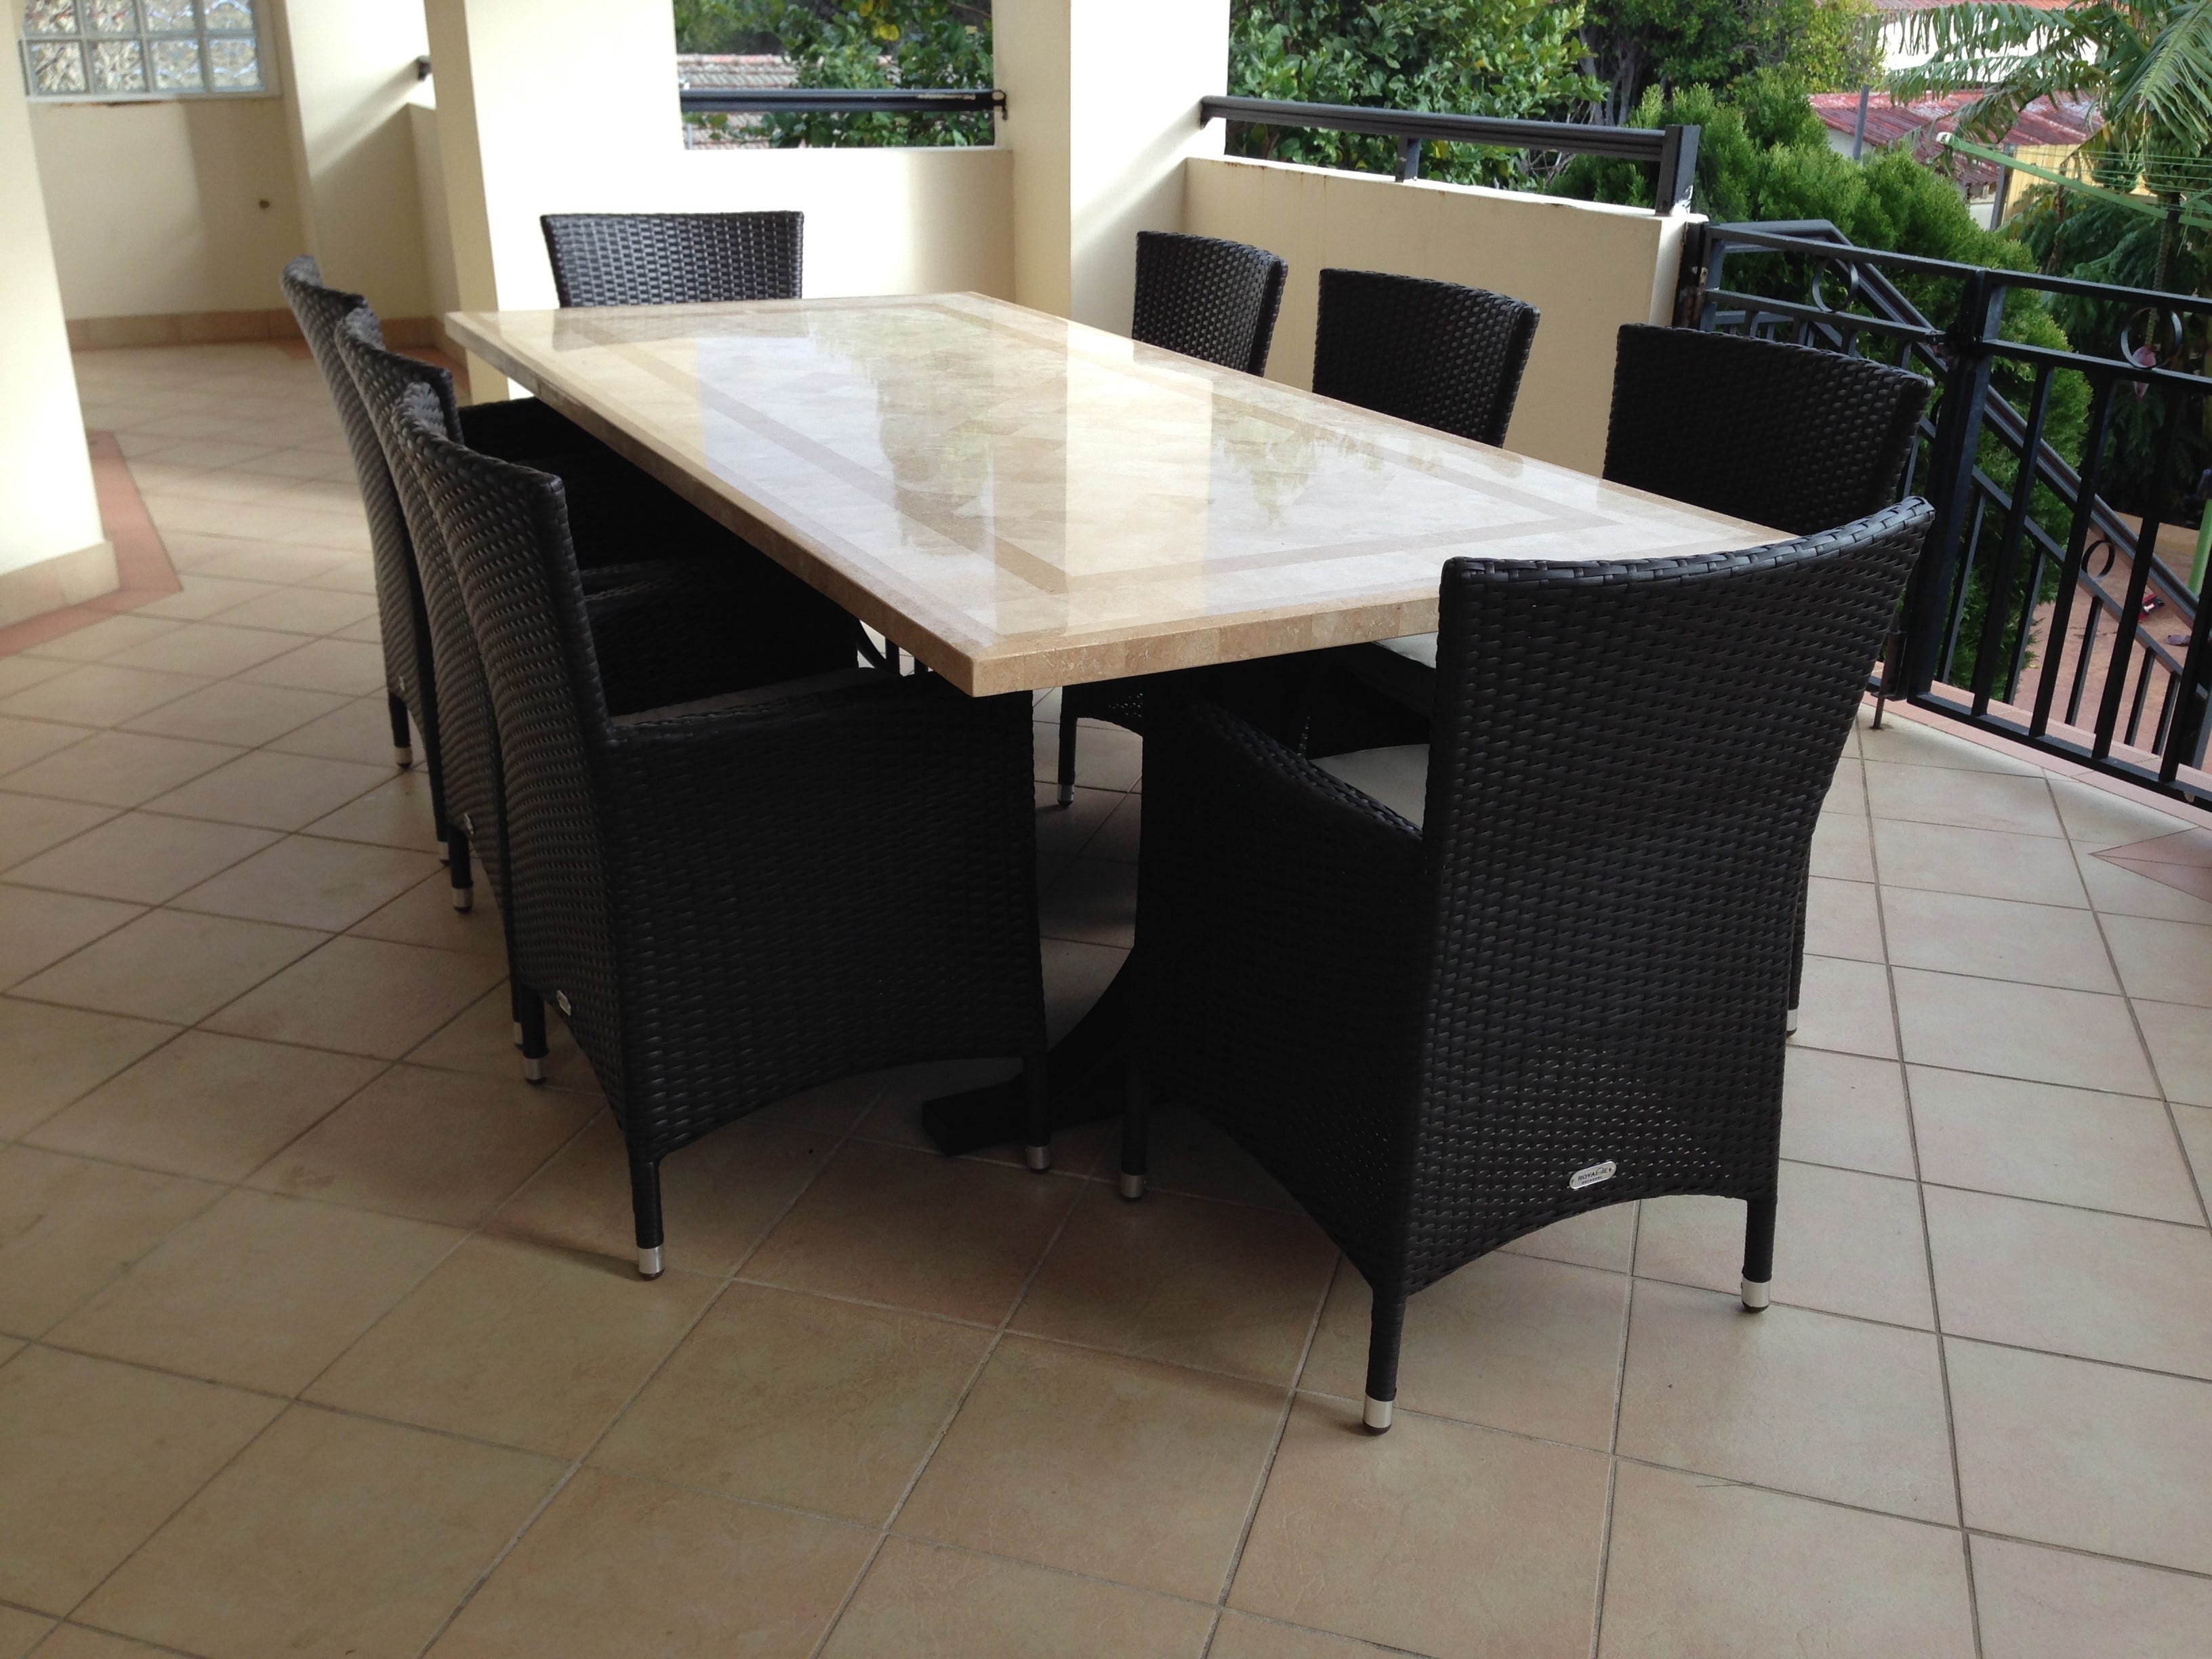 Natural stone outdoor tables